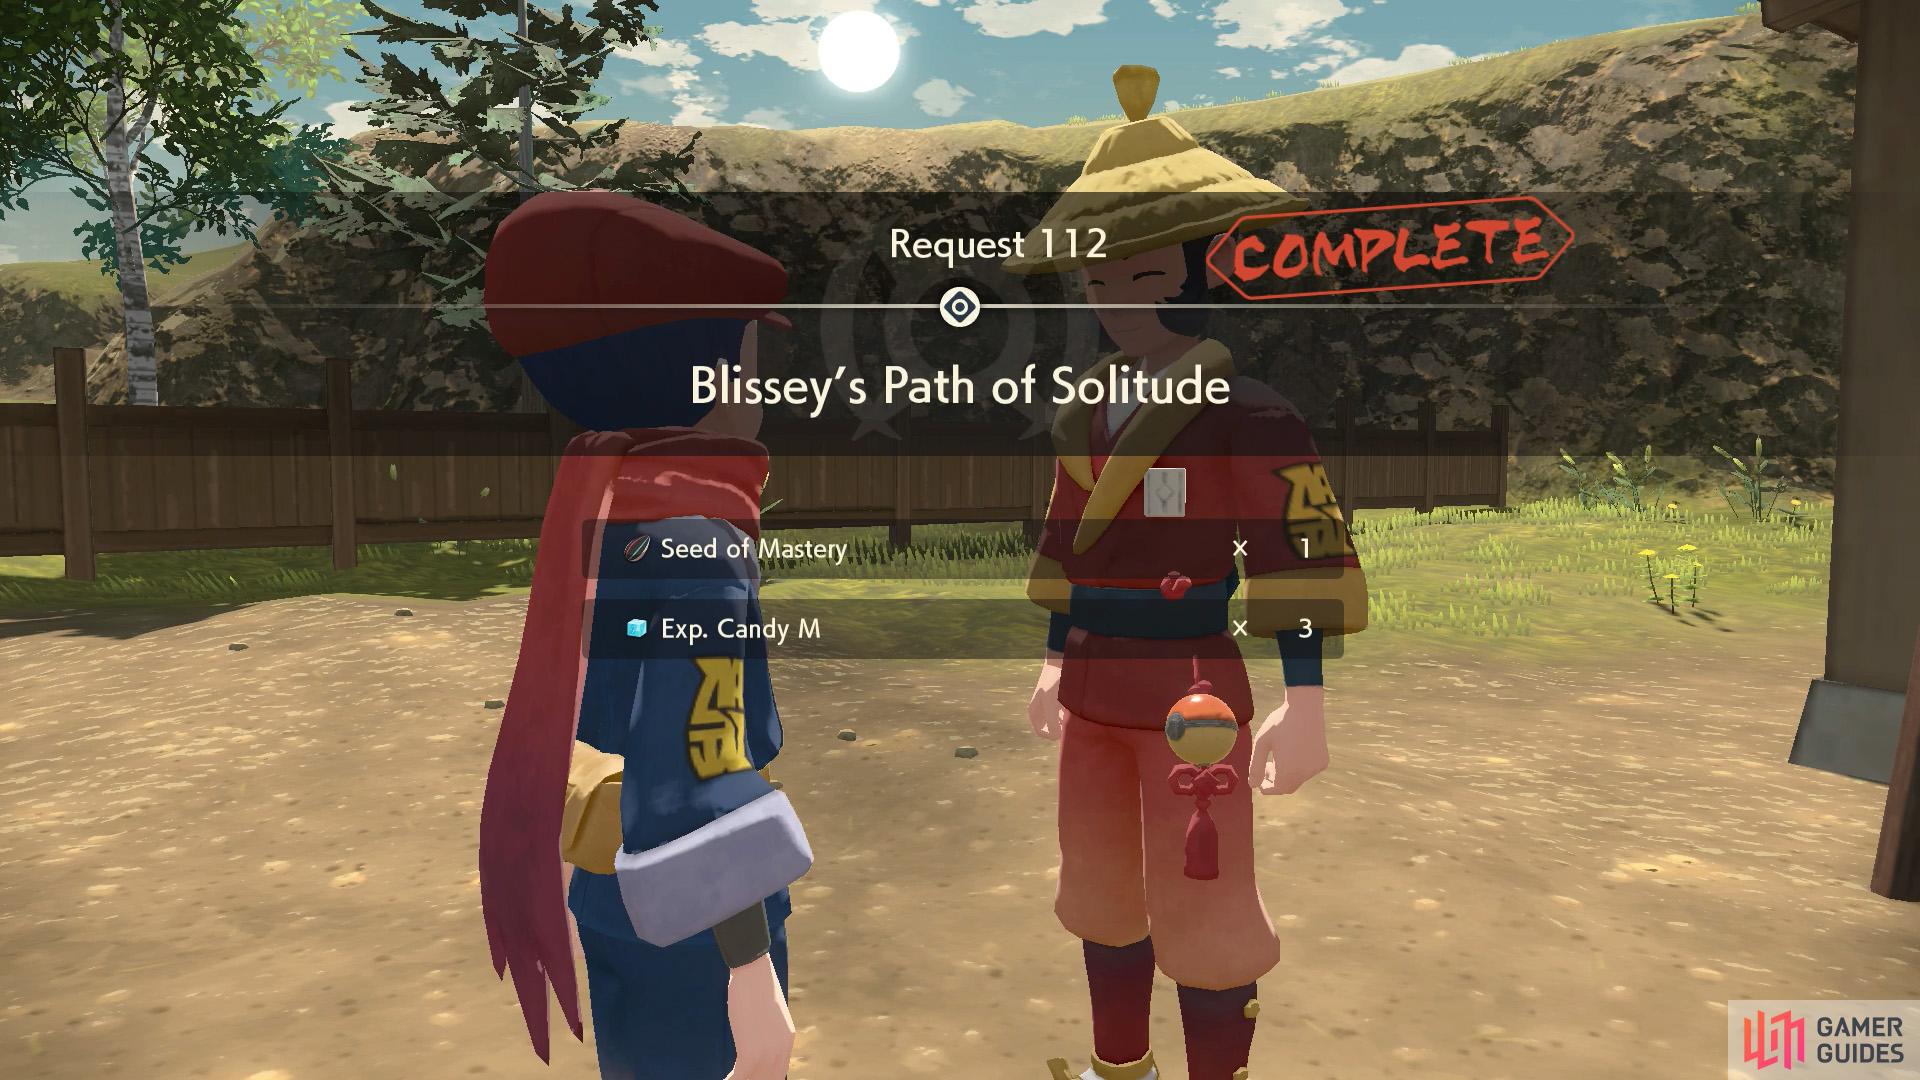 Another Path of Solitude cleared. Onto the next one!